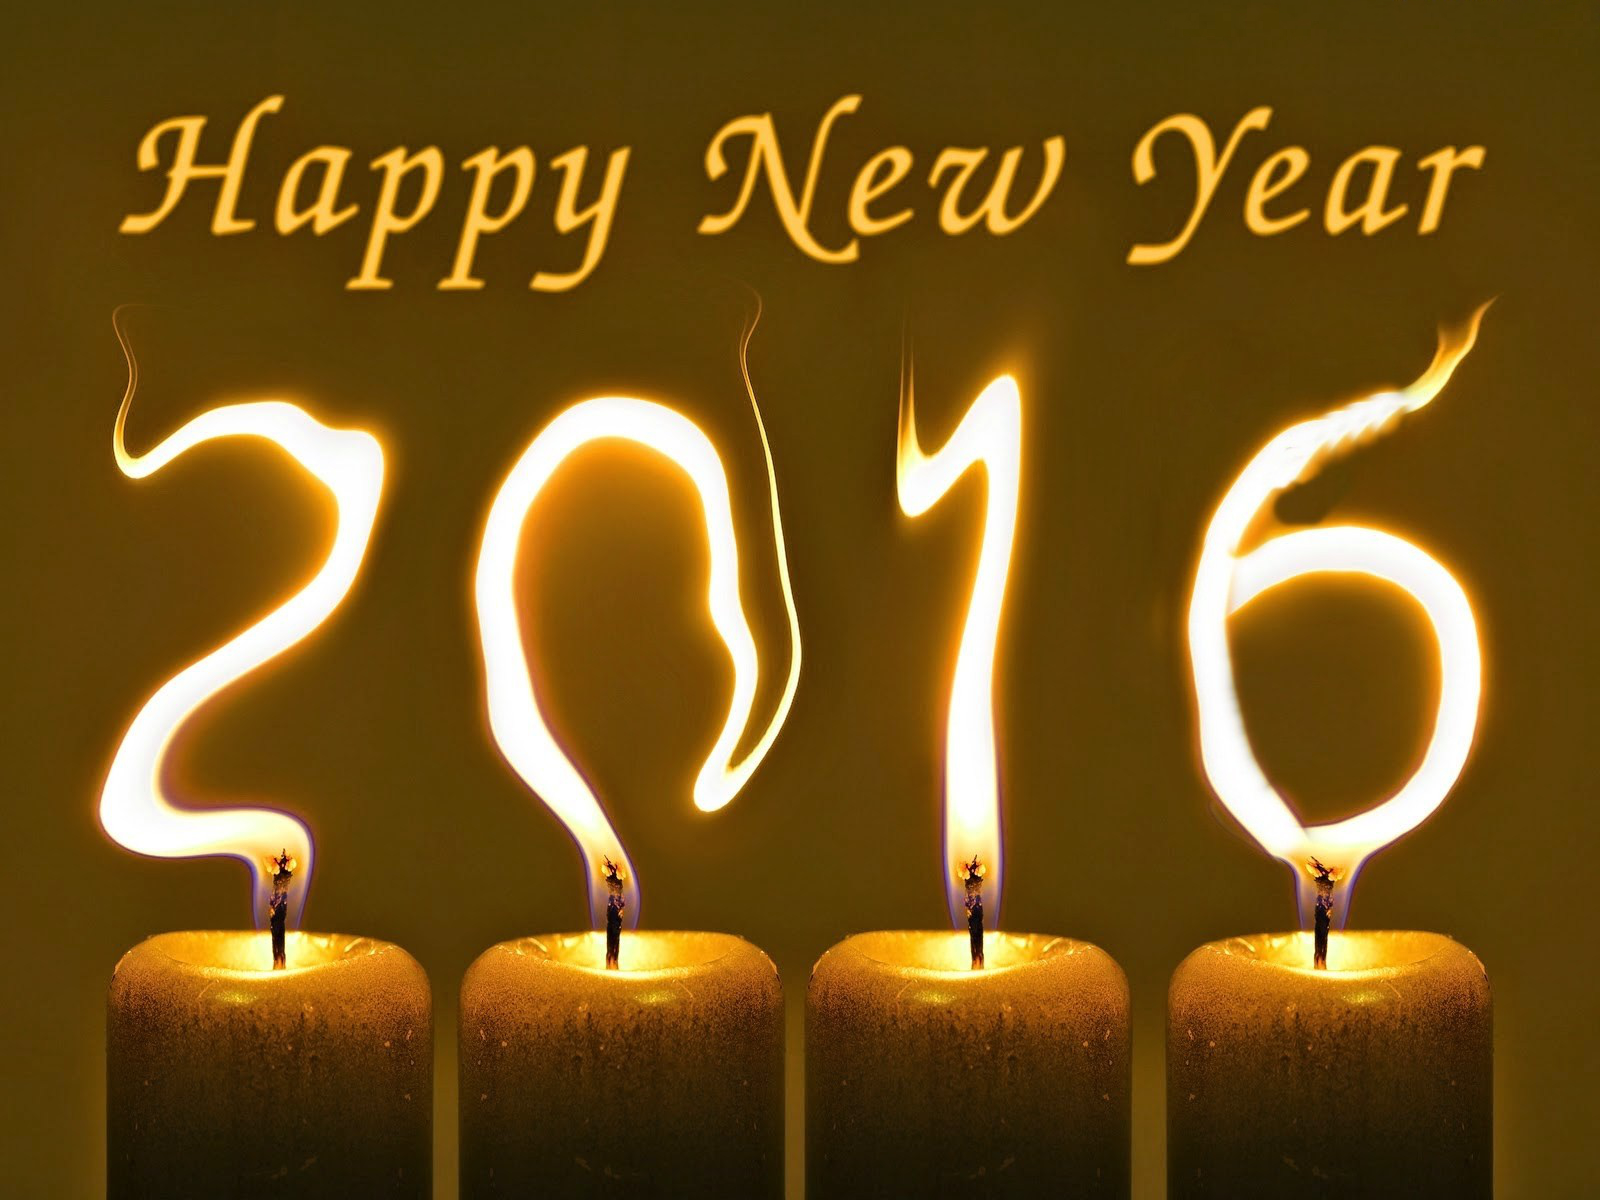 holiday, new year 2016, candle